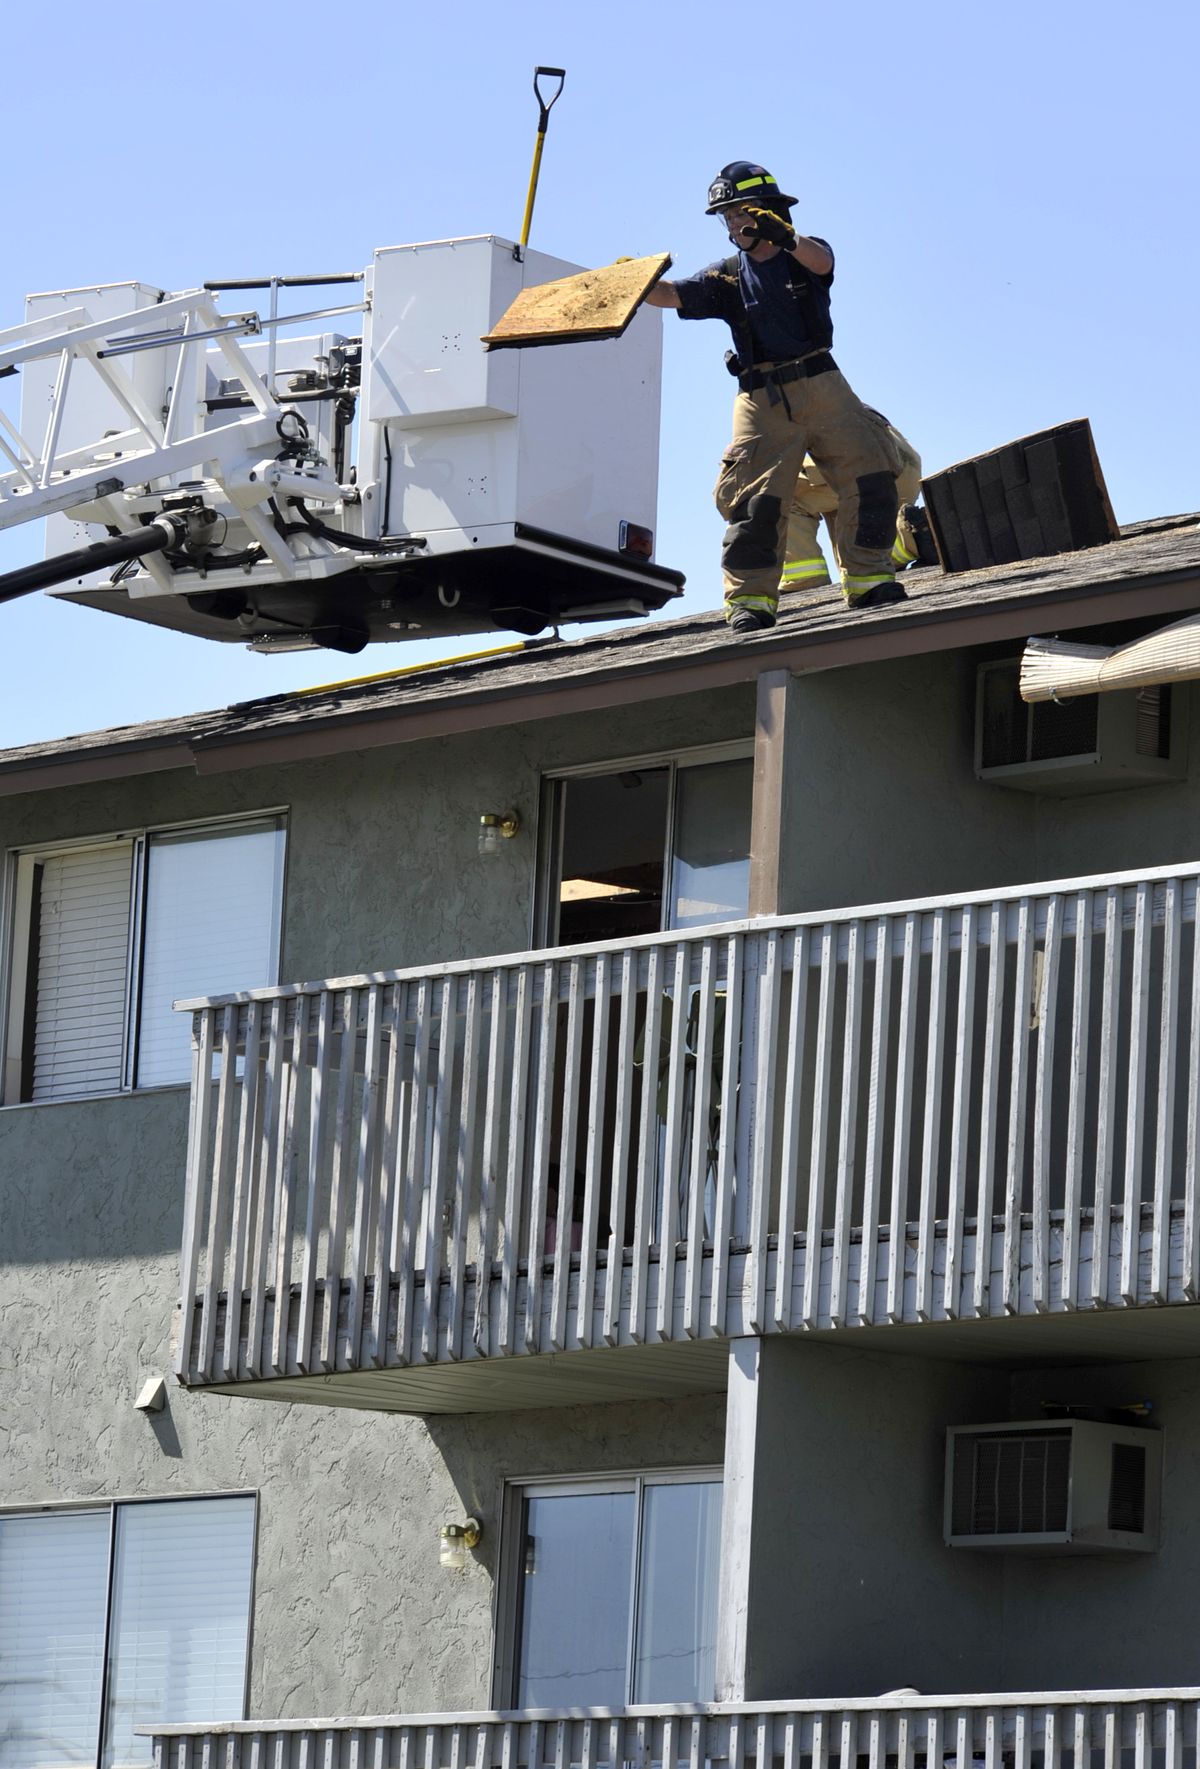 A Spokane firefighter tosses debris from the roof of a three-story apartment building Aug. 24, 2011, after a ceiling fan started a fire and burned the roof at the corner of Boone Avenue and Nelson Street in Spokane. (Dan Pelle / The Spokesman-Review)